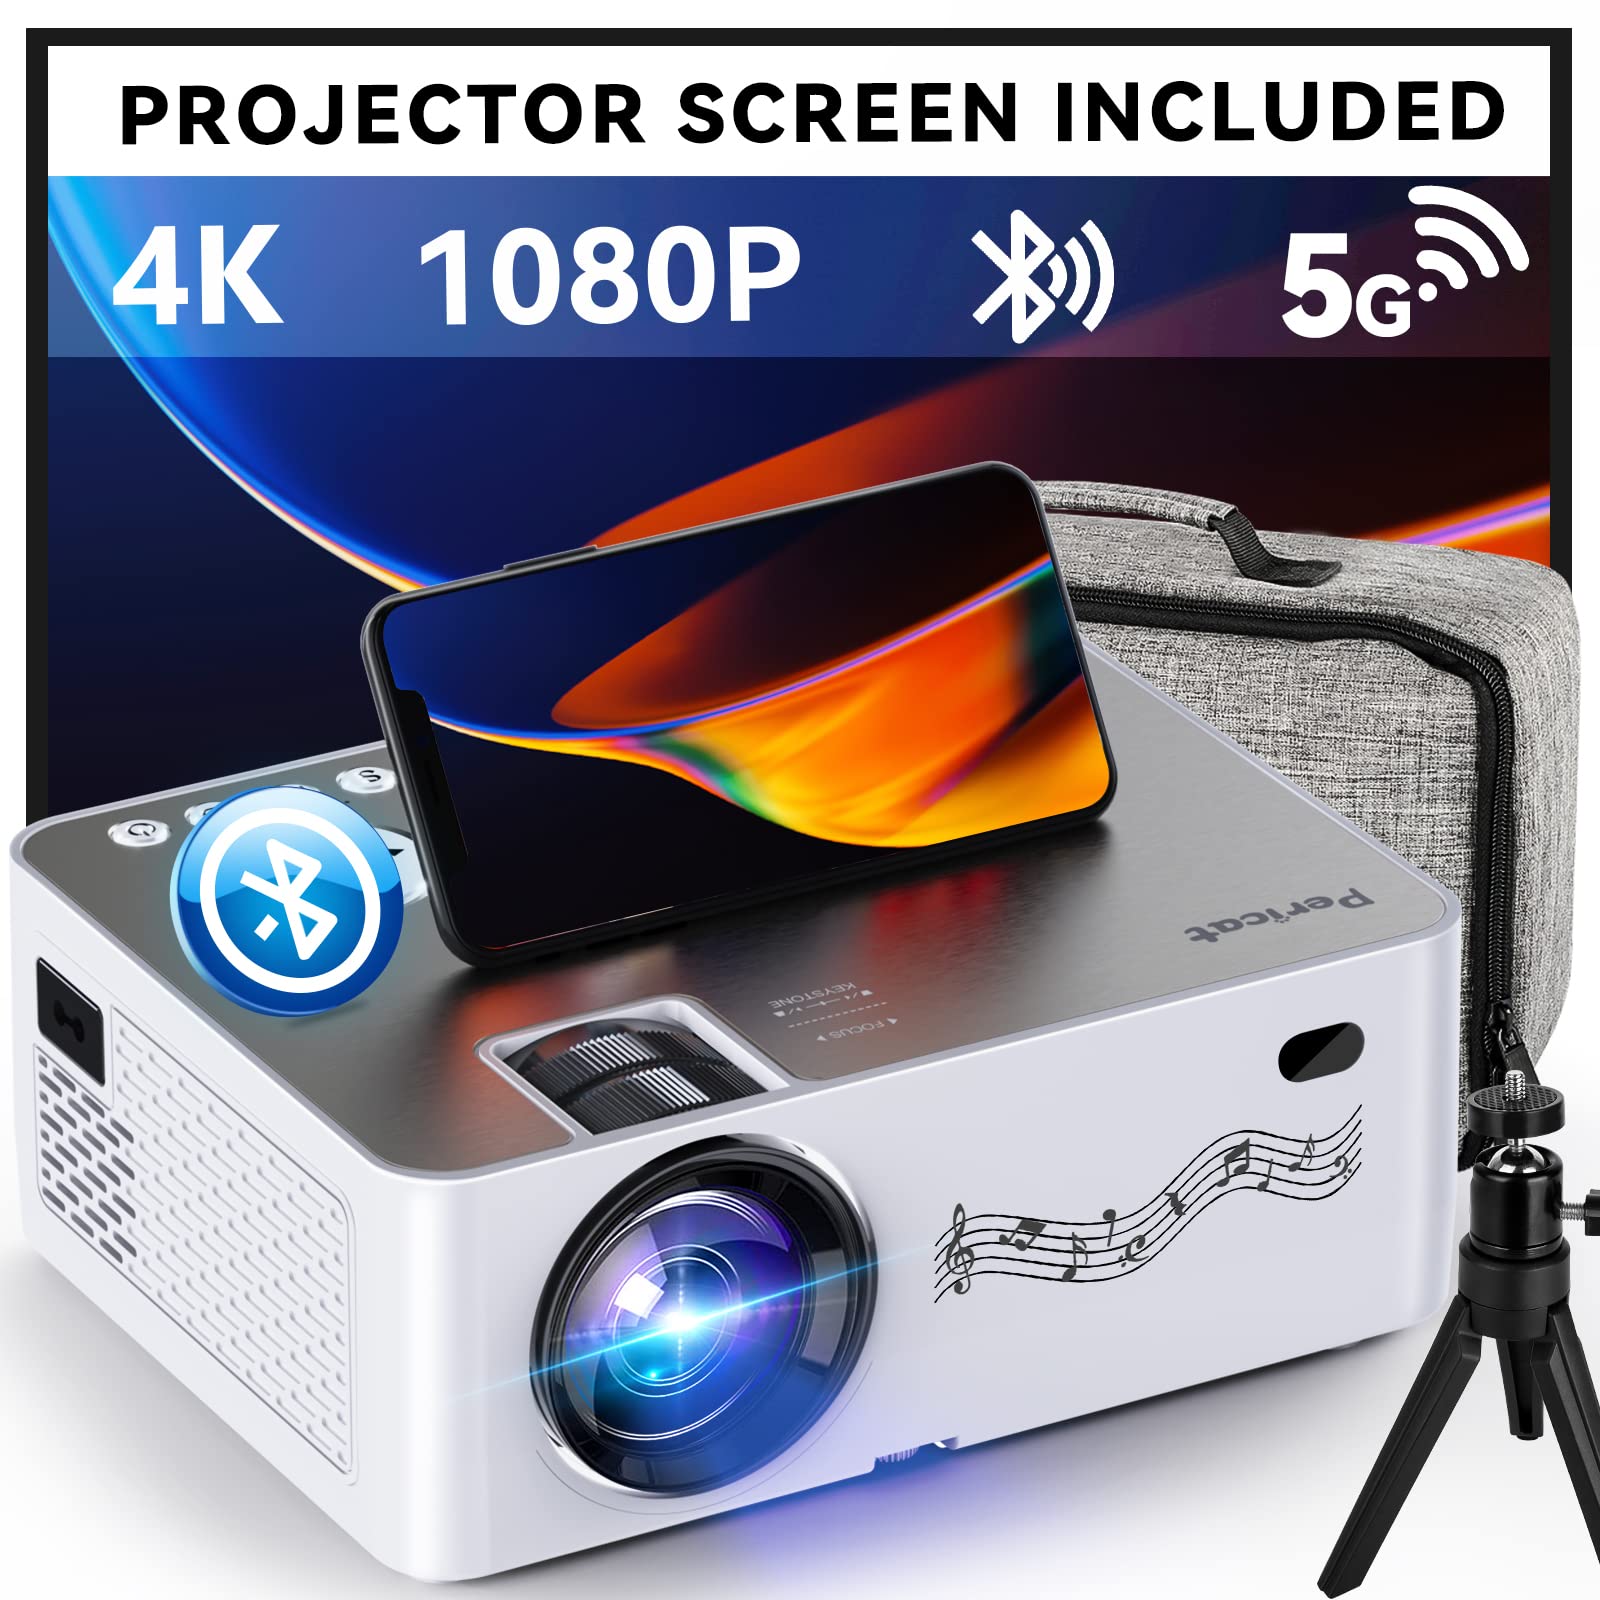 Projector with WiFi and Bluetooth, 5G WiFi, Native 1080P/16000L Video Projector with Screen, 4K Support Outdoor Projector, 350'' Display Phone Projector with Carry Bag for iPhone,TV Stick, Mac